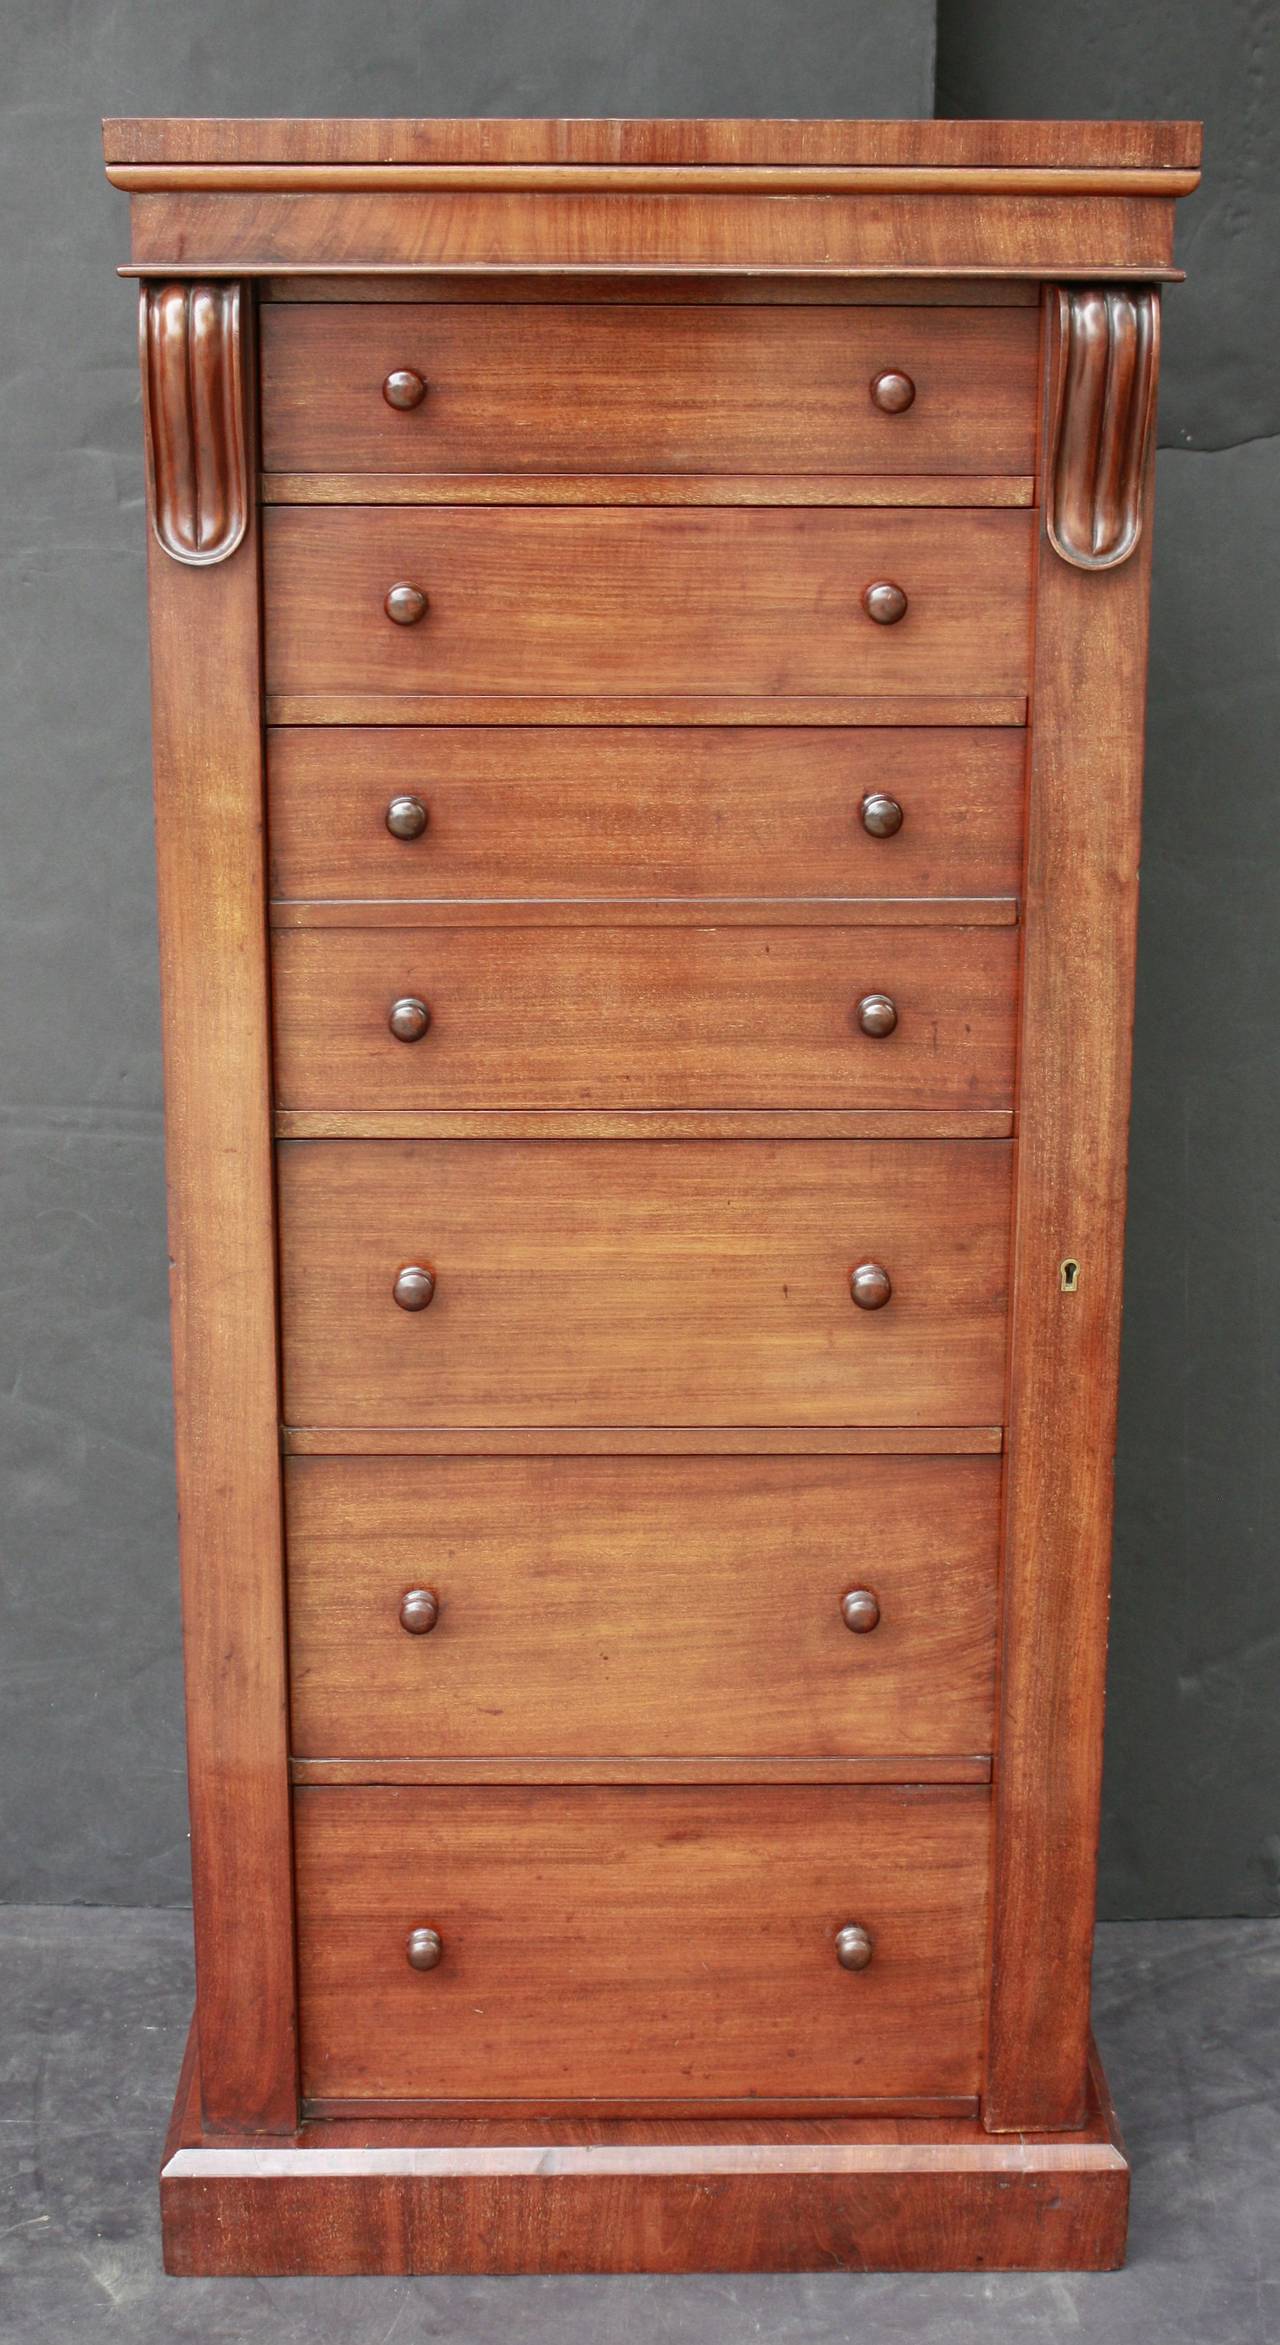 An English cabinet or chest of mahogany, fondly known as a Wellington, featuring a moulded top over six drawers of ascending size (top to bottom). 
The third and fourth drawers with faux front (giving an overall appearance of seven drawers),